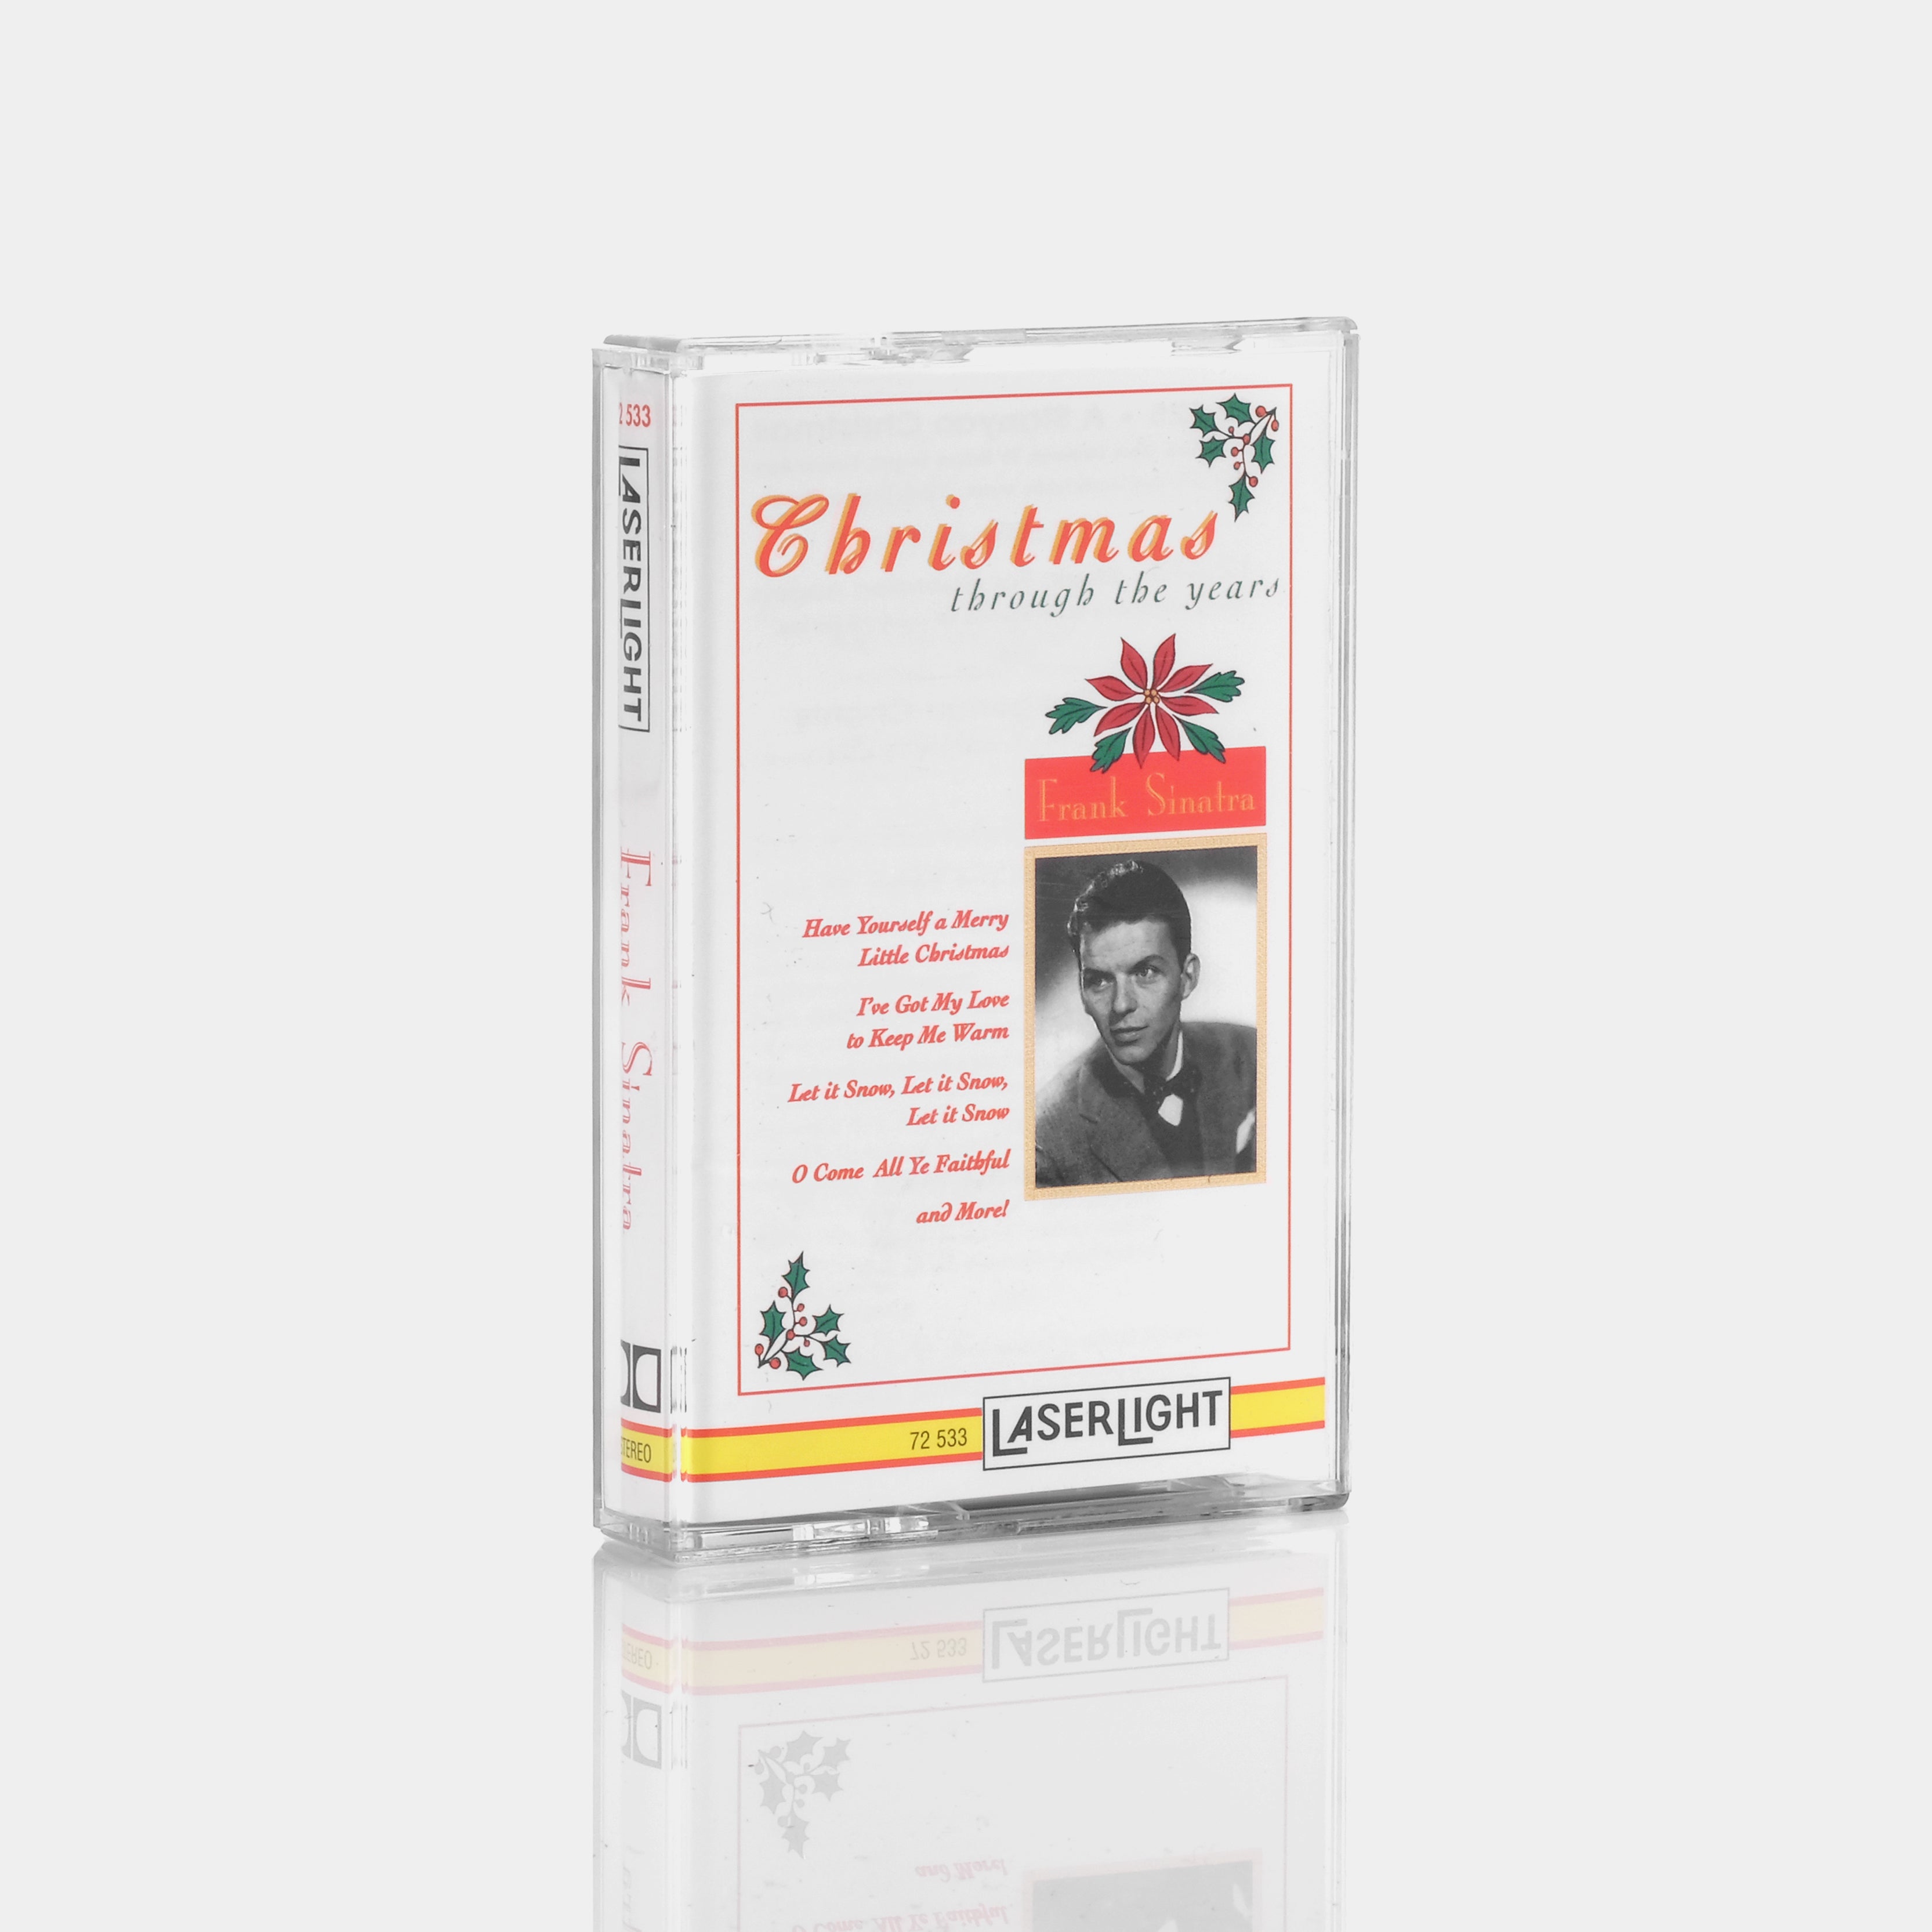 Frank Sinatra - Christmas Through The Years Cassette Tape